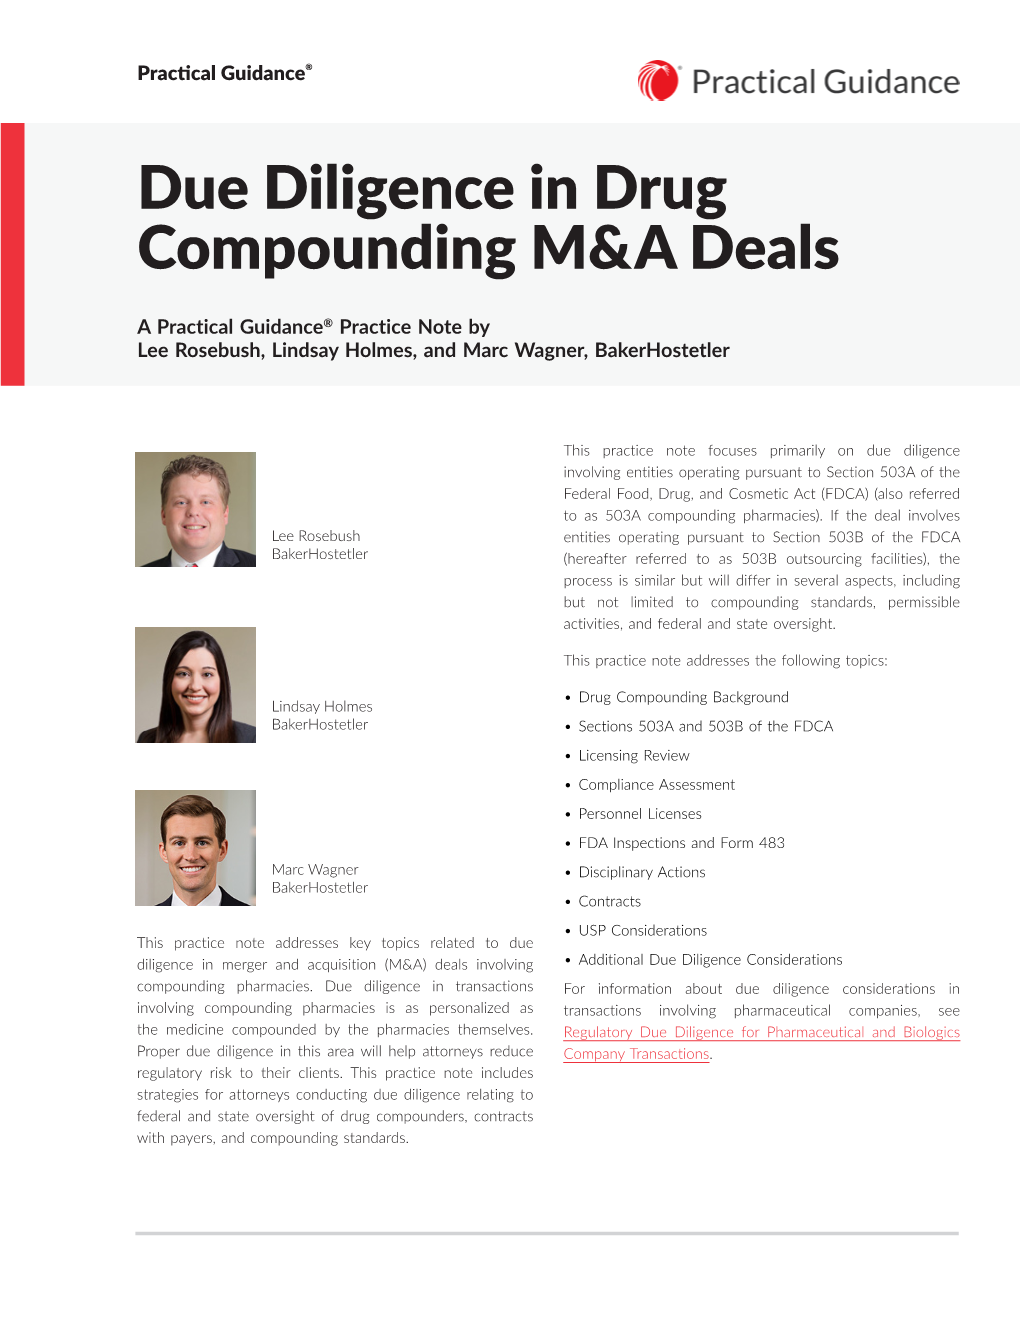 Due Diligence in Drug Compounding M&A Deals